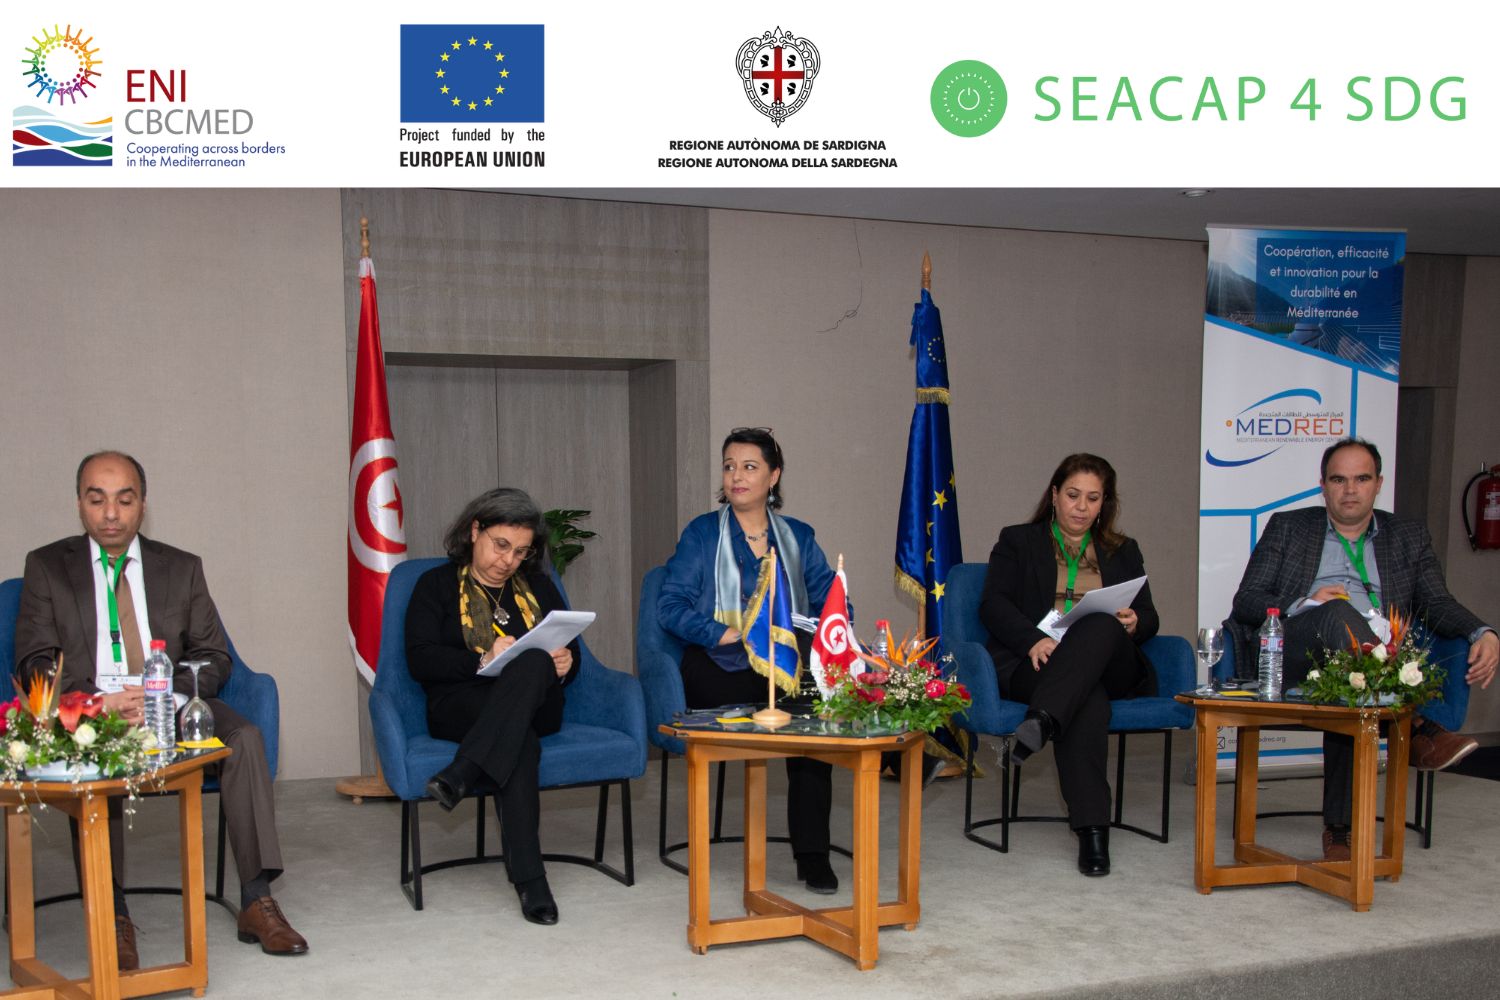 SEACAP4SDG organizes an event on Green and Efficient Cities for a Sustainable Mediterranean in Tunisia